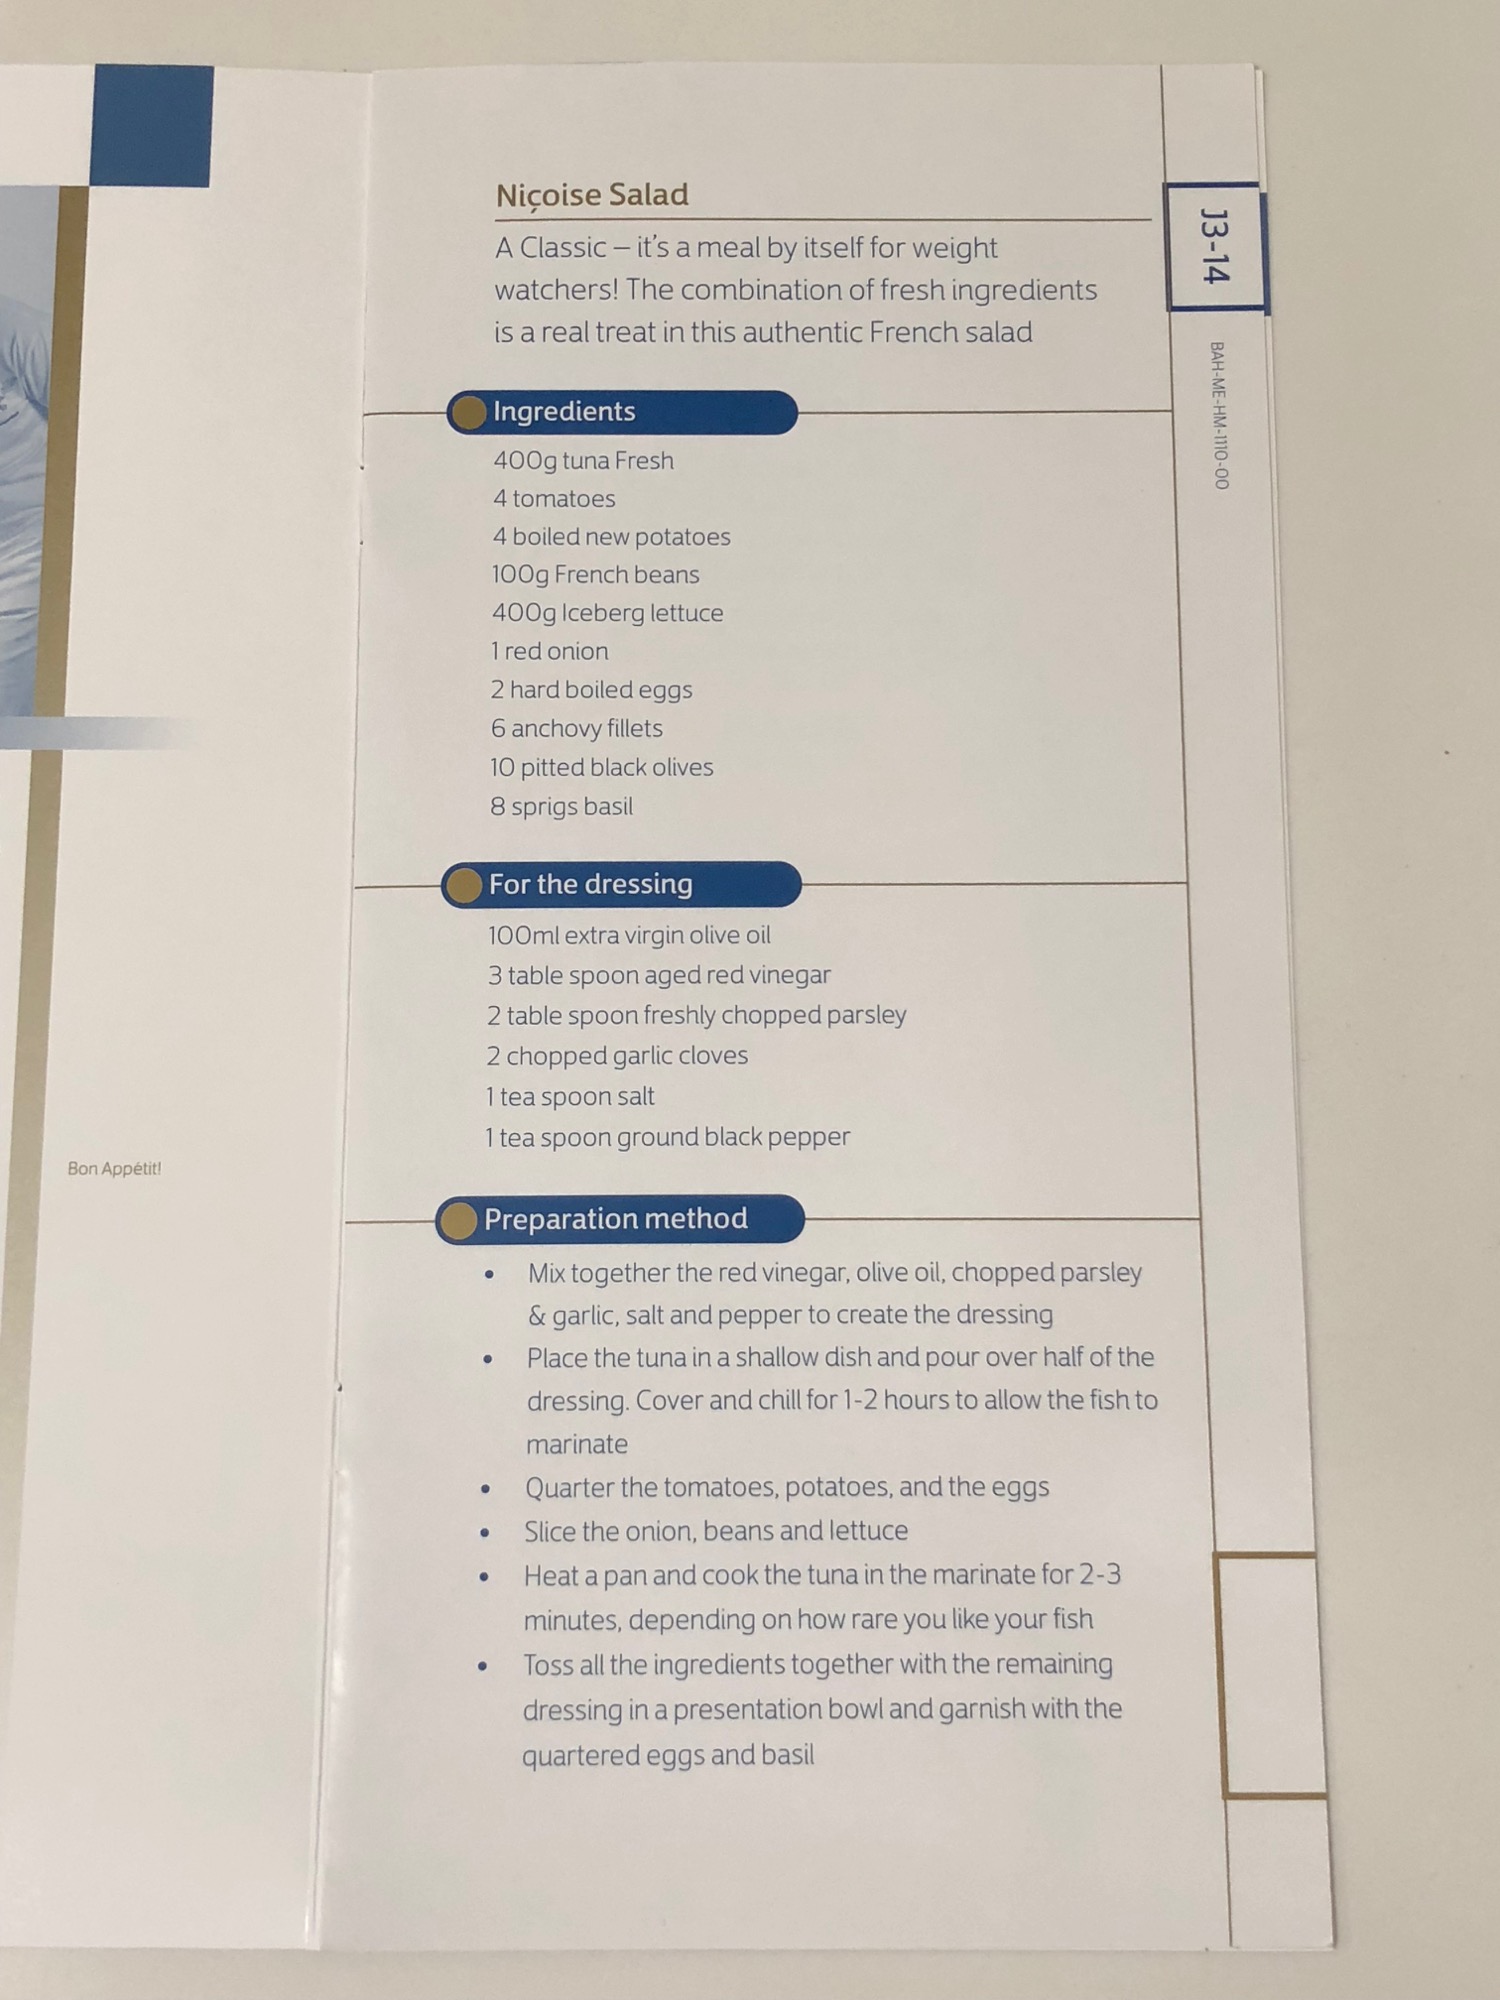 a white paper with blue text